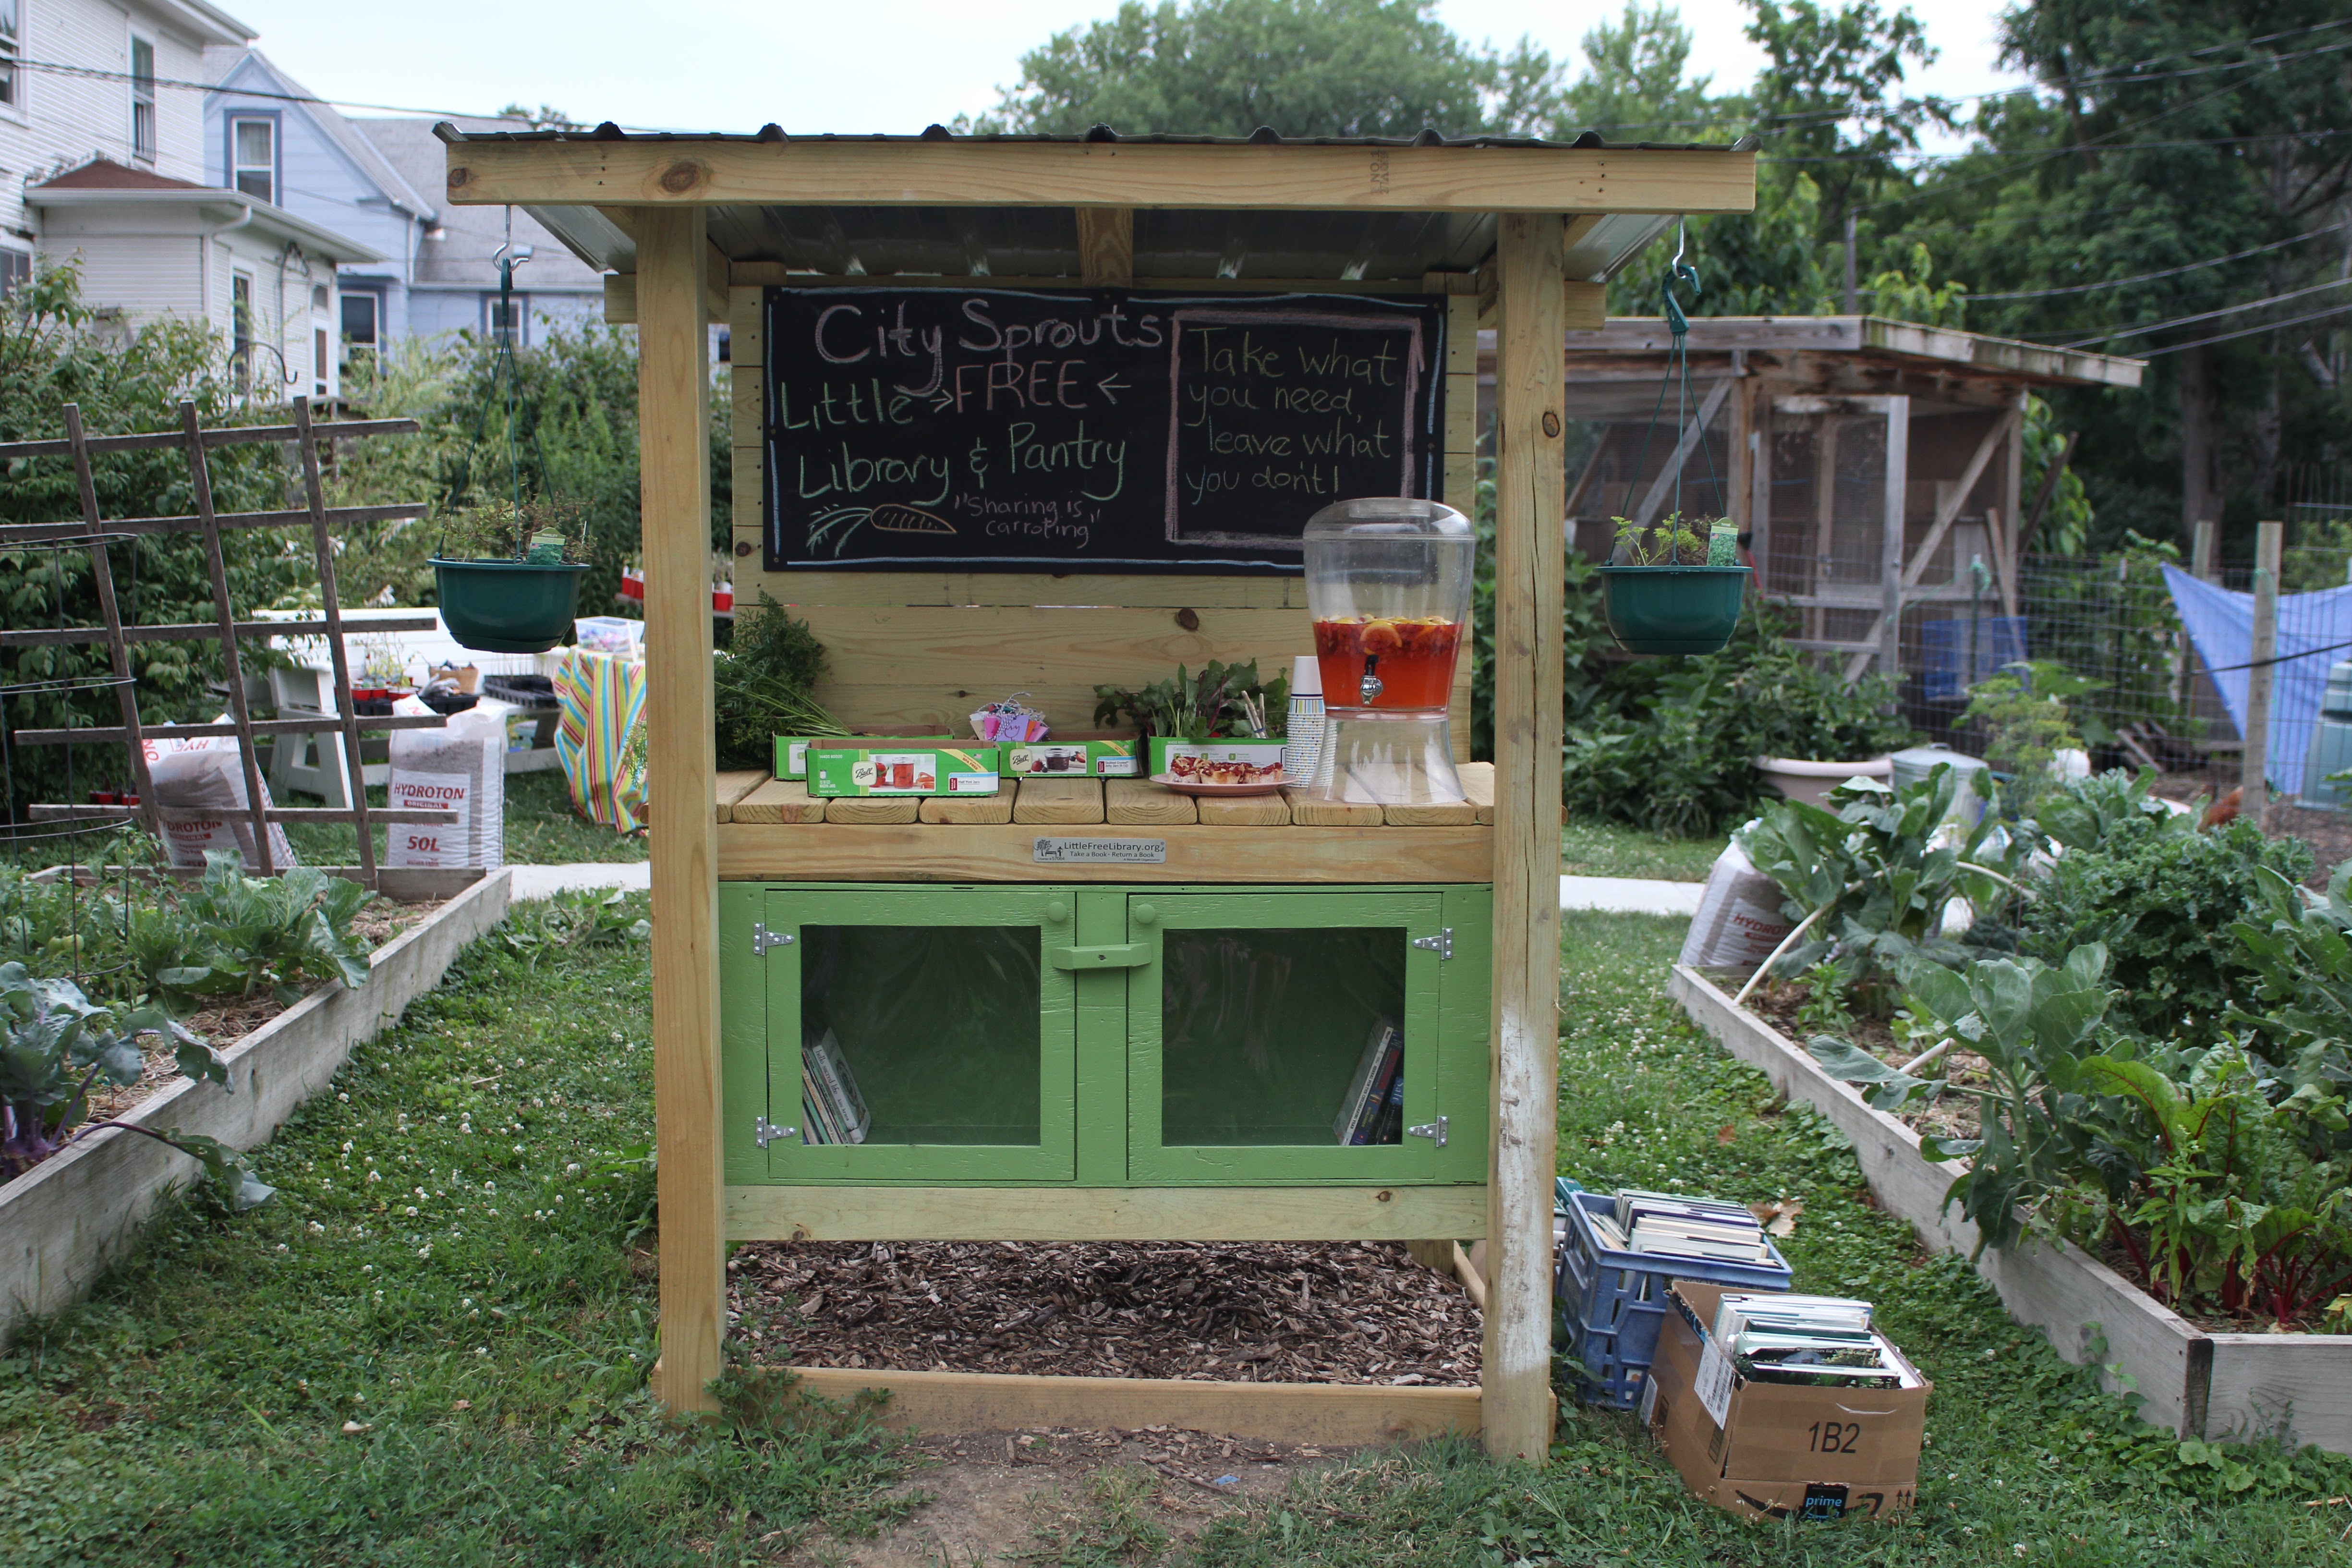 City Sprouts Little Free Pantry & Library Photo 1